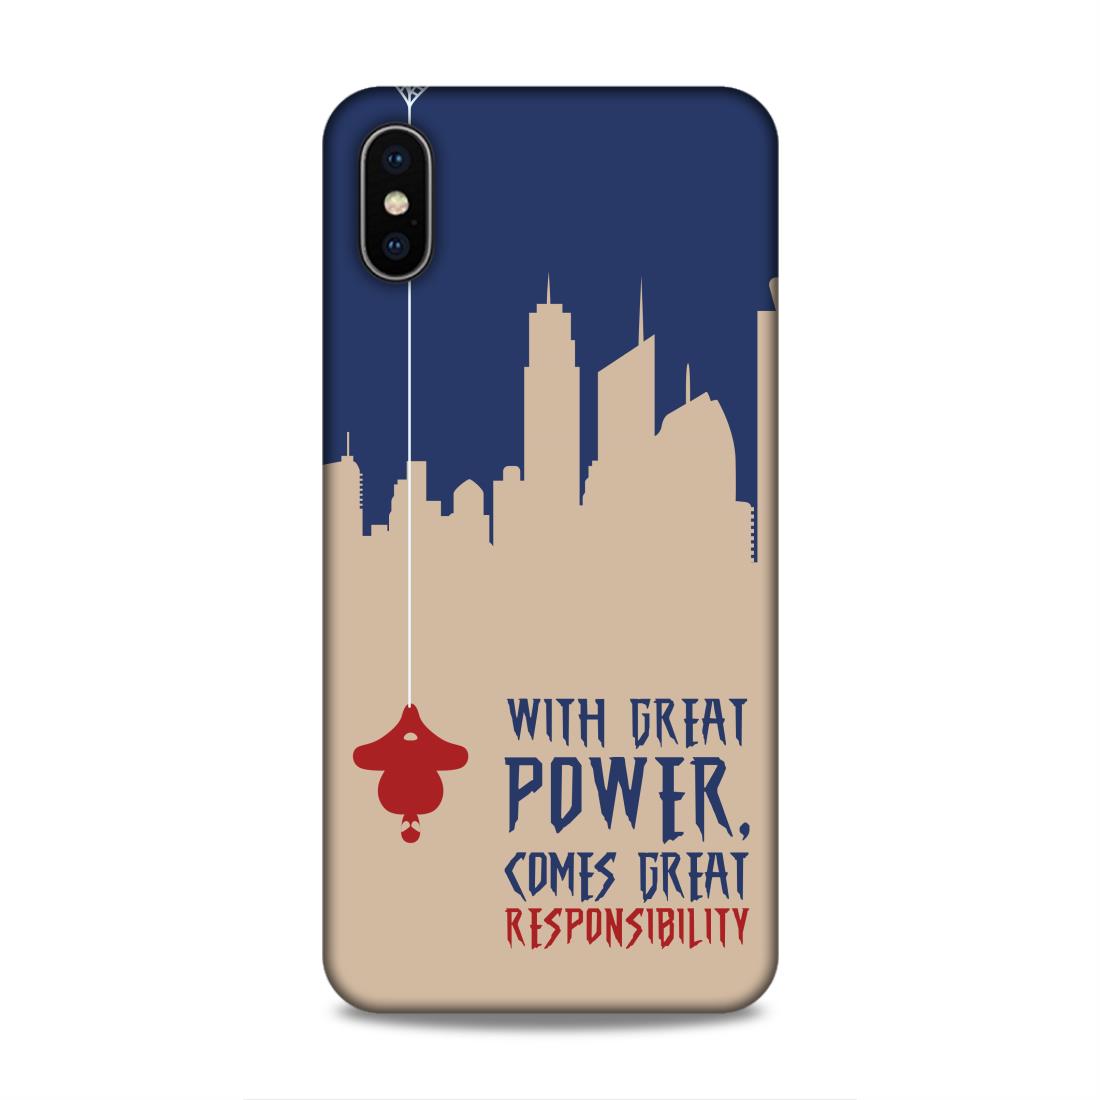 Great Power Comes Great Responsibility Hard Back Case For Apple iPhone XS Max